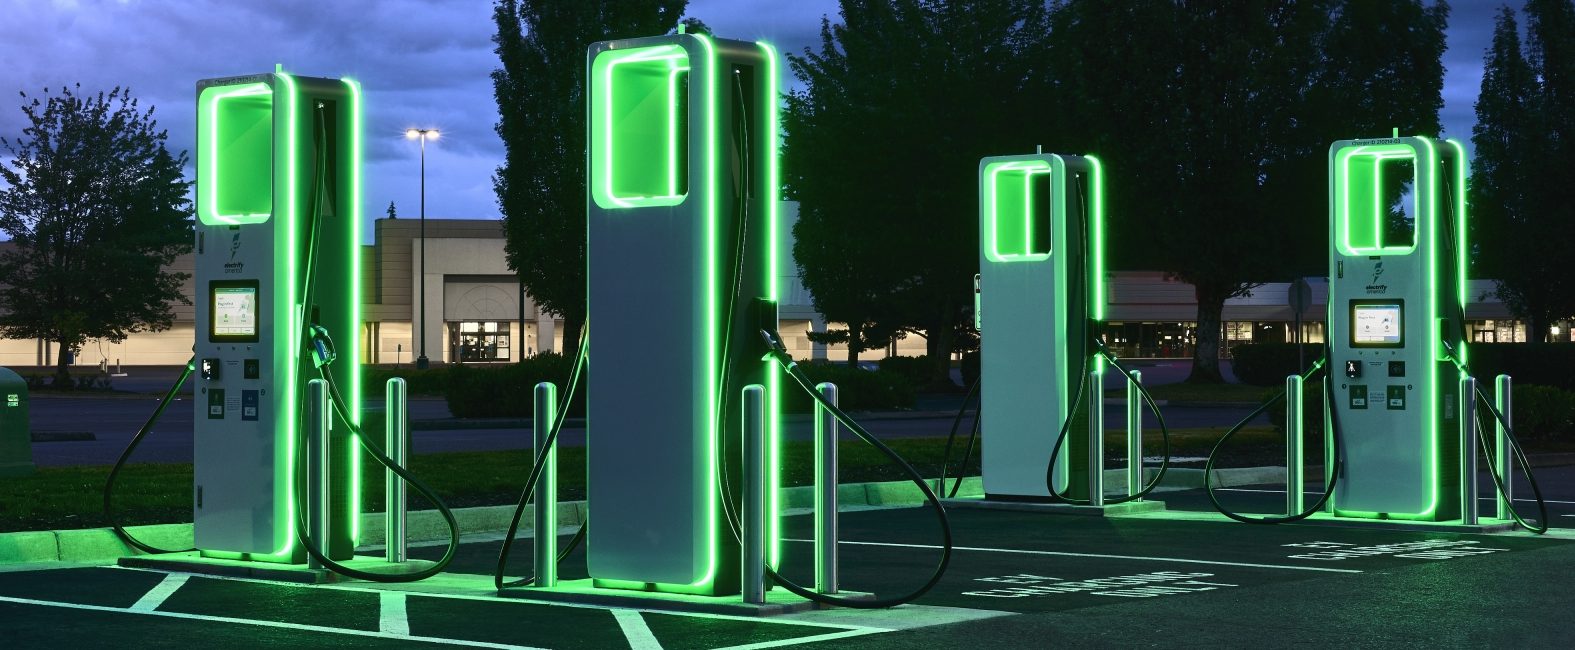 TravelCenters of America to Add EV Fast-Charger Stations - WSJ